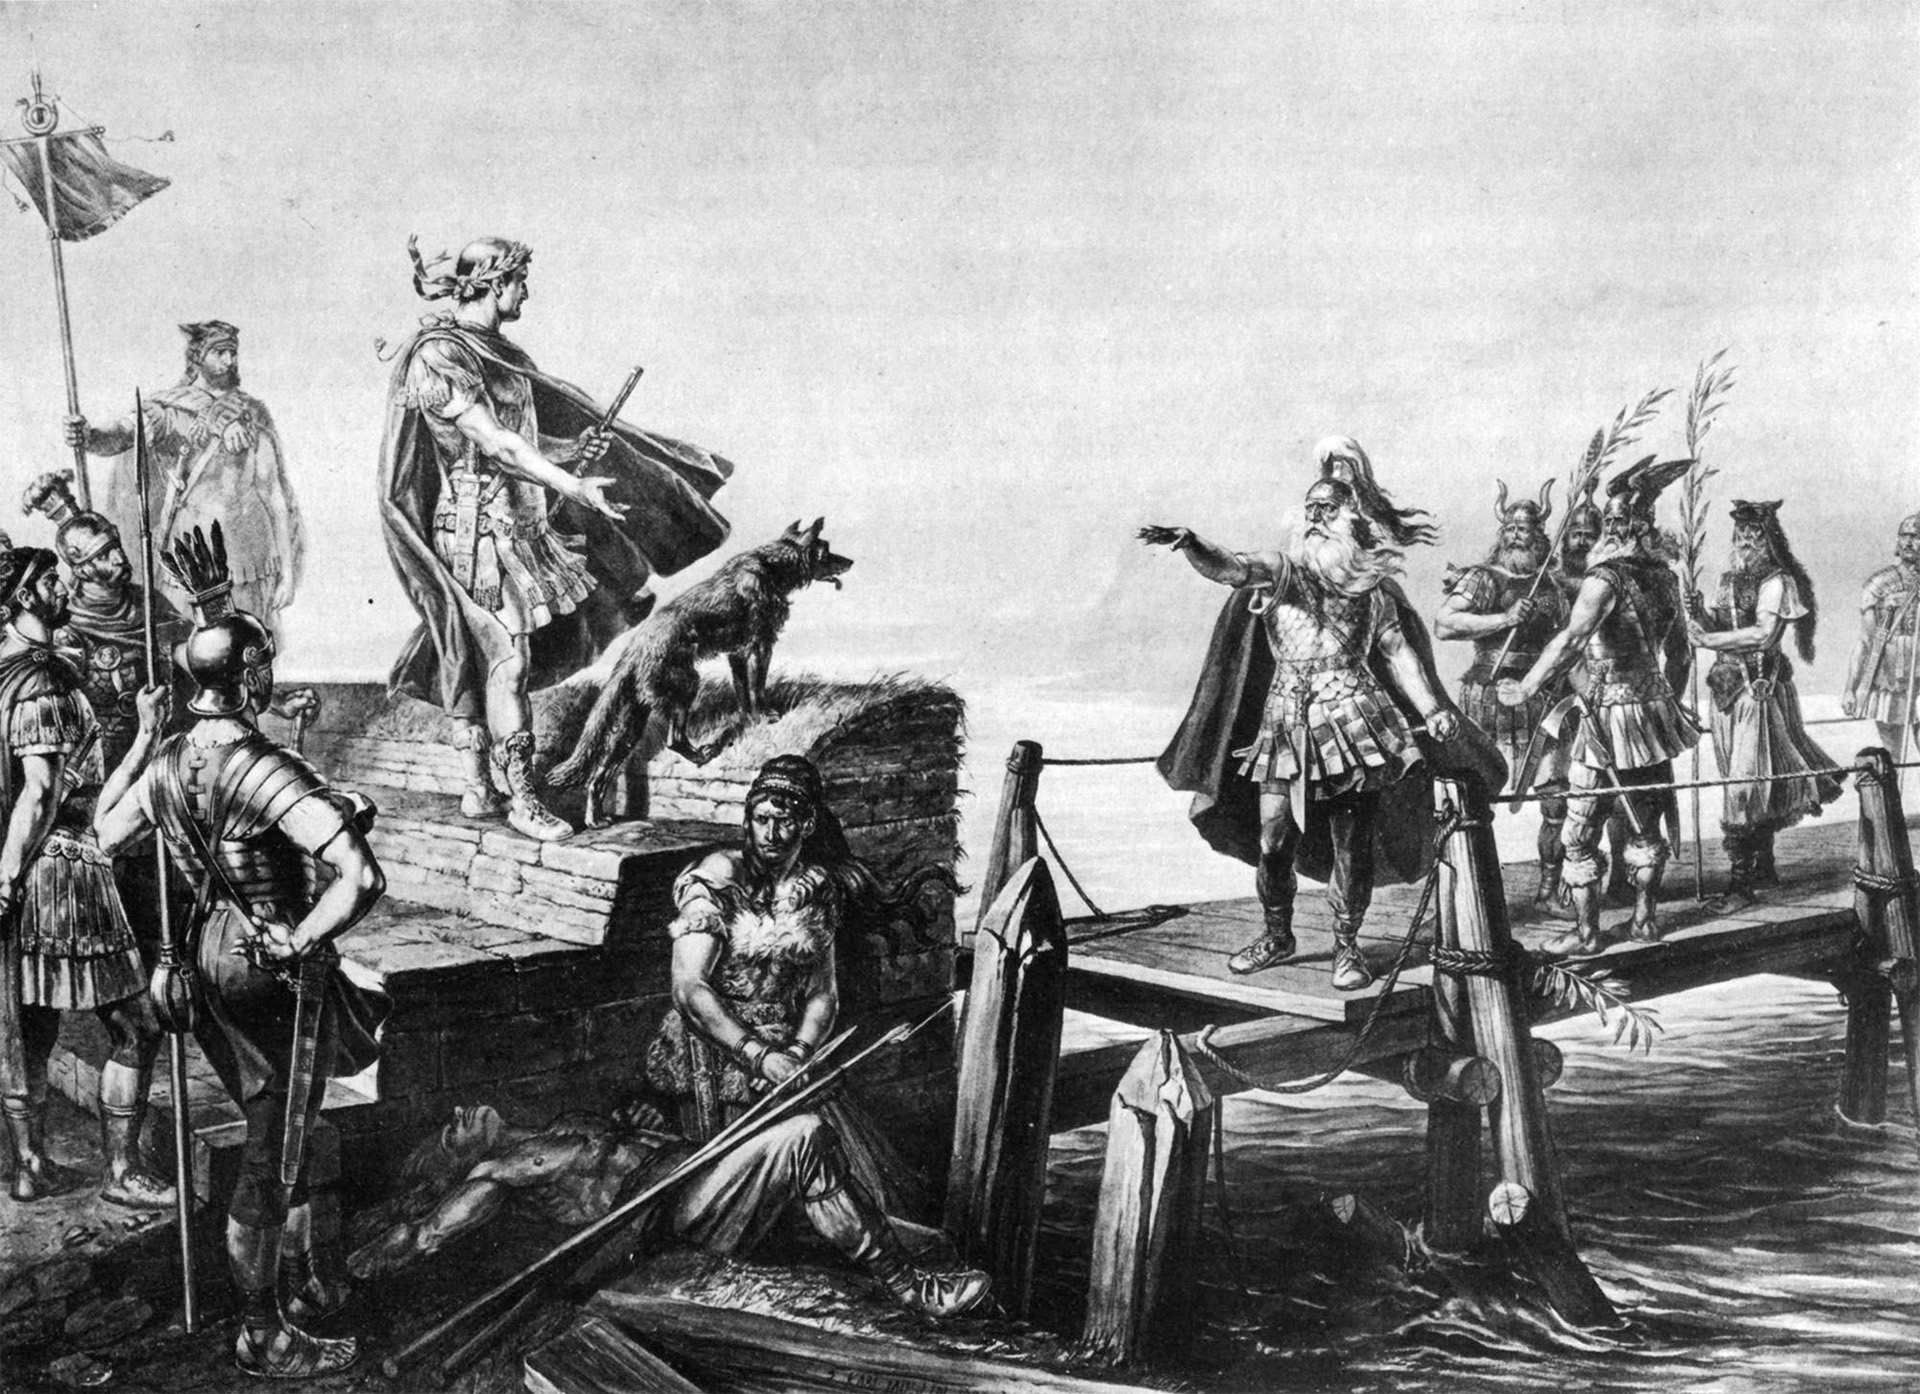 Caesar parlays with Helvetii tribal leader Divico in 58 bc at the outset of the Gallic wars. The Helvetii sent troops to support Vercingetorix during his uprising.